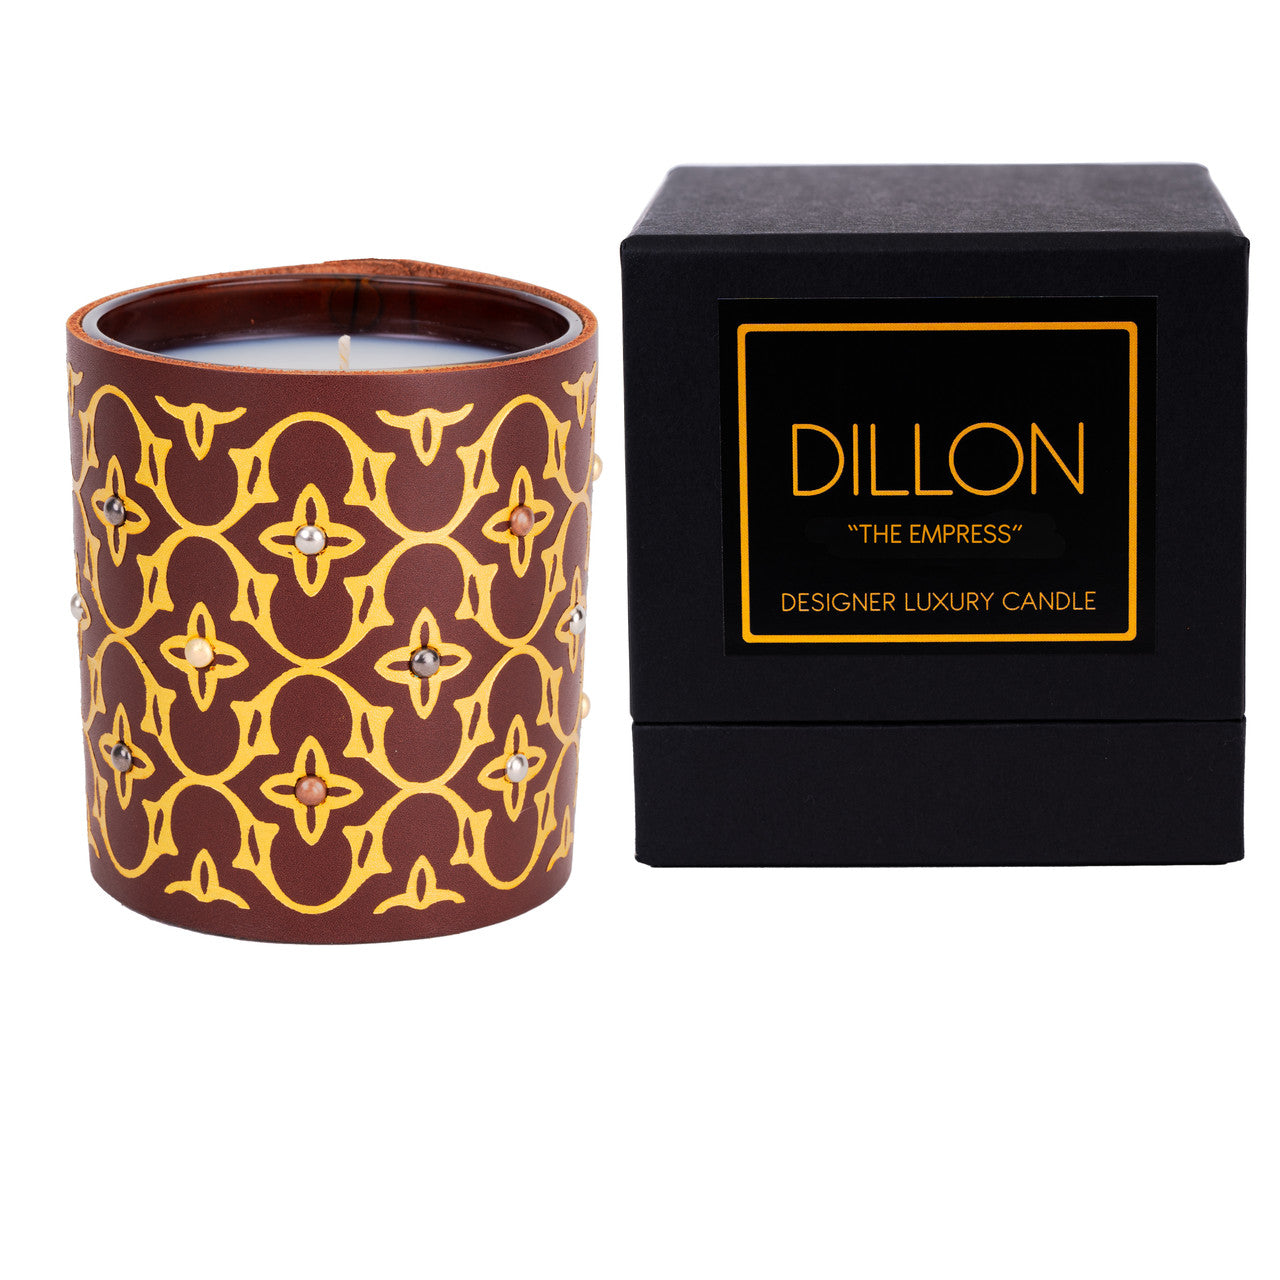 THE EMPRESS SANDALWOOD SCENT BROWN CANDLE